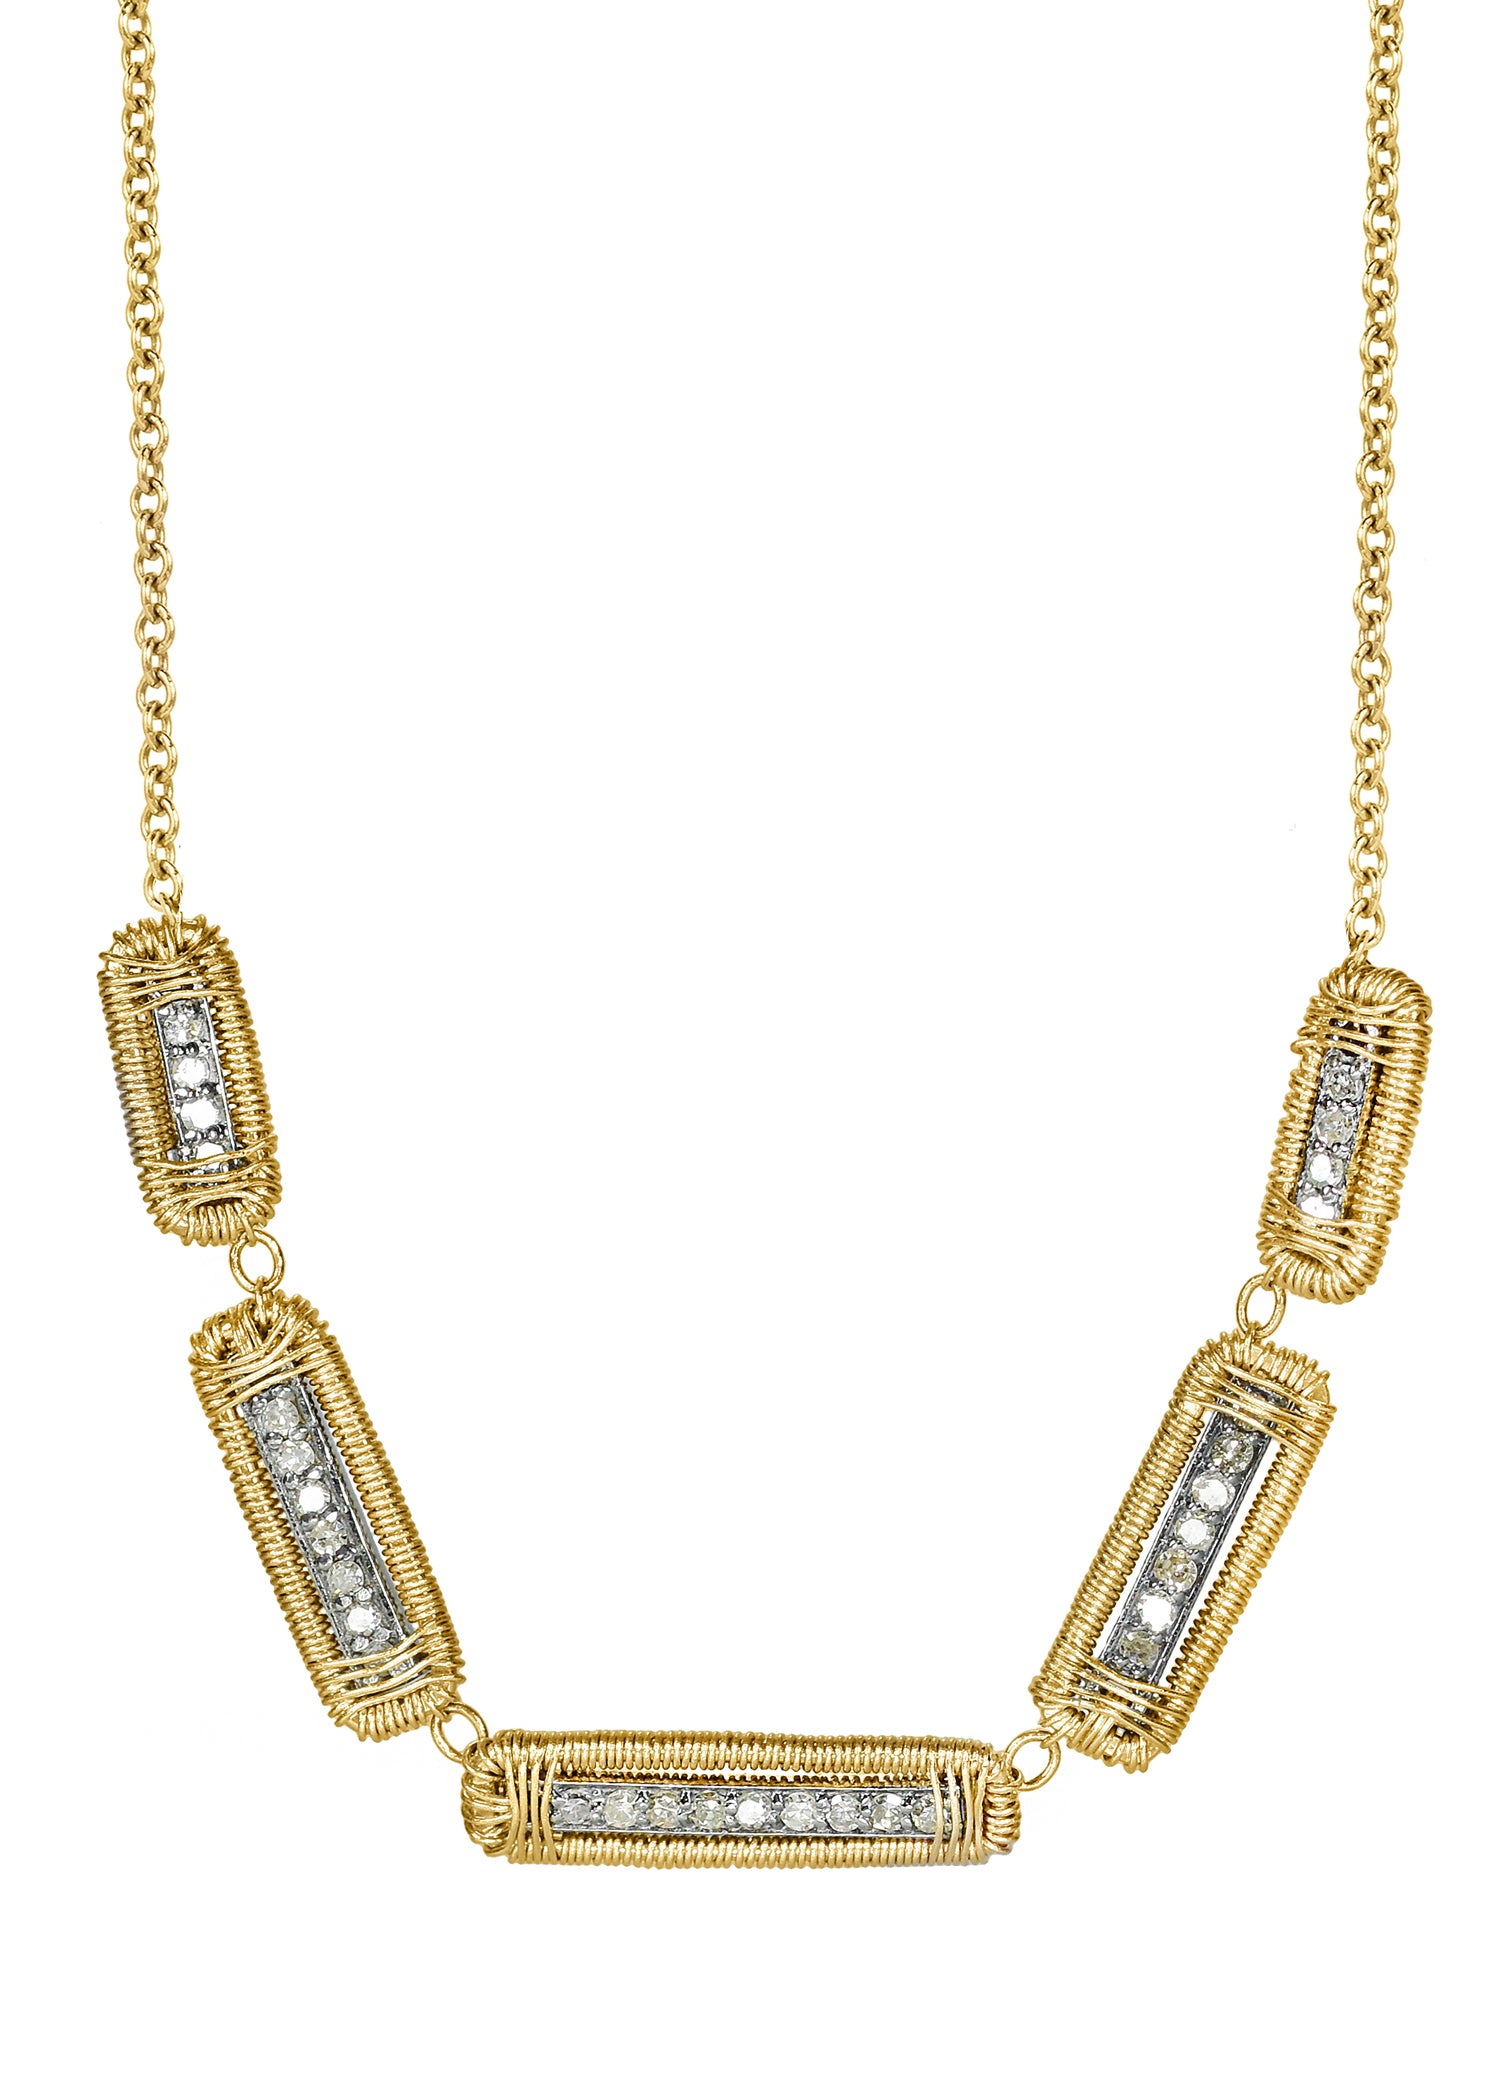 Diamond 14k gold Sterling silver Mixed metal Special order only Necklace measures 16" in length Pendants measure 3/8" in length and 3/16" in width (x2), 1/2" in length and 3/16" width (x2), and 3/16" in length and 5/8" in width (x1) Handmade in our Los Angeles studio